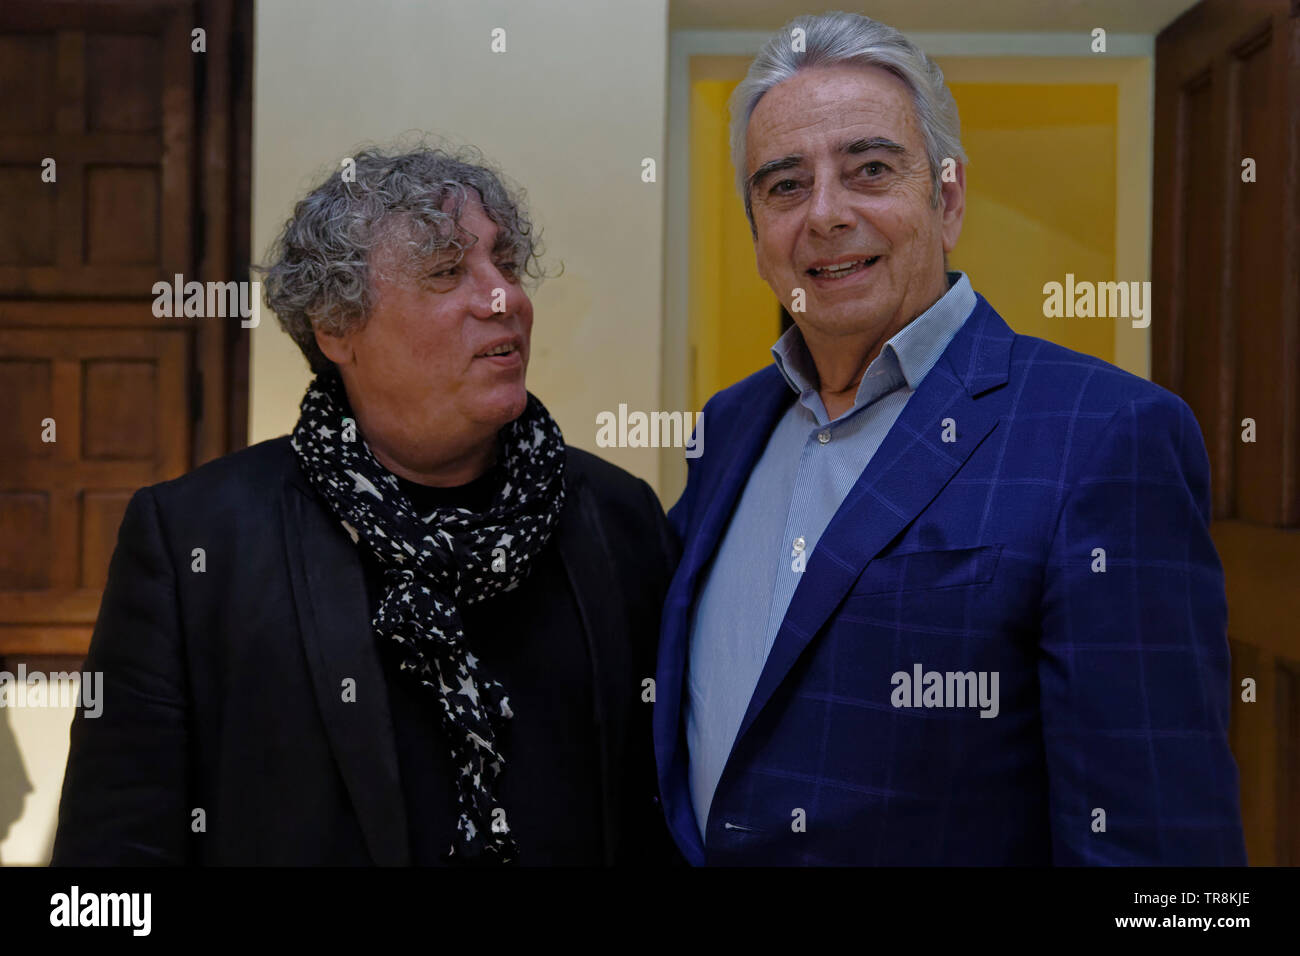 Tours, France.24th May,2019.Gerard Capazza and J-G Badaire attend the Exhibition Re-naissance(s) of the Capazza Gallery in Tours, France Stock Photo